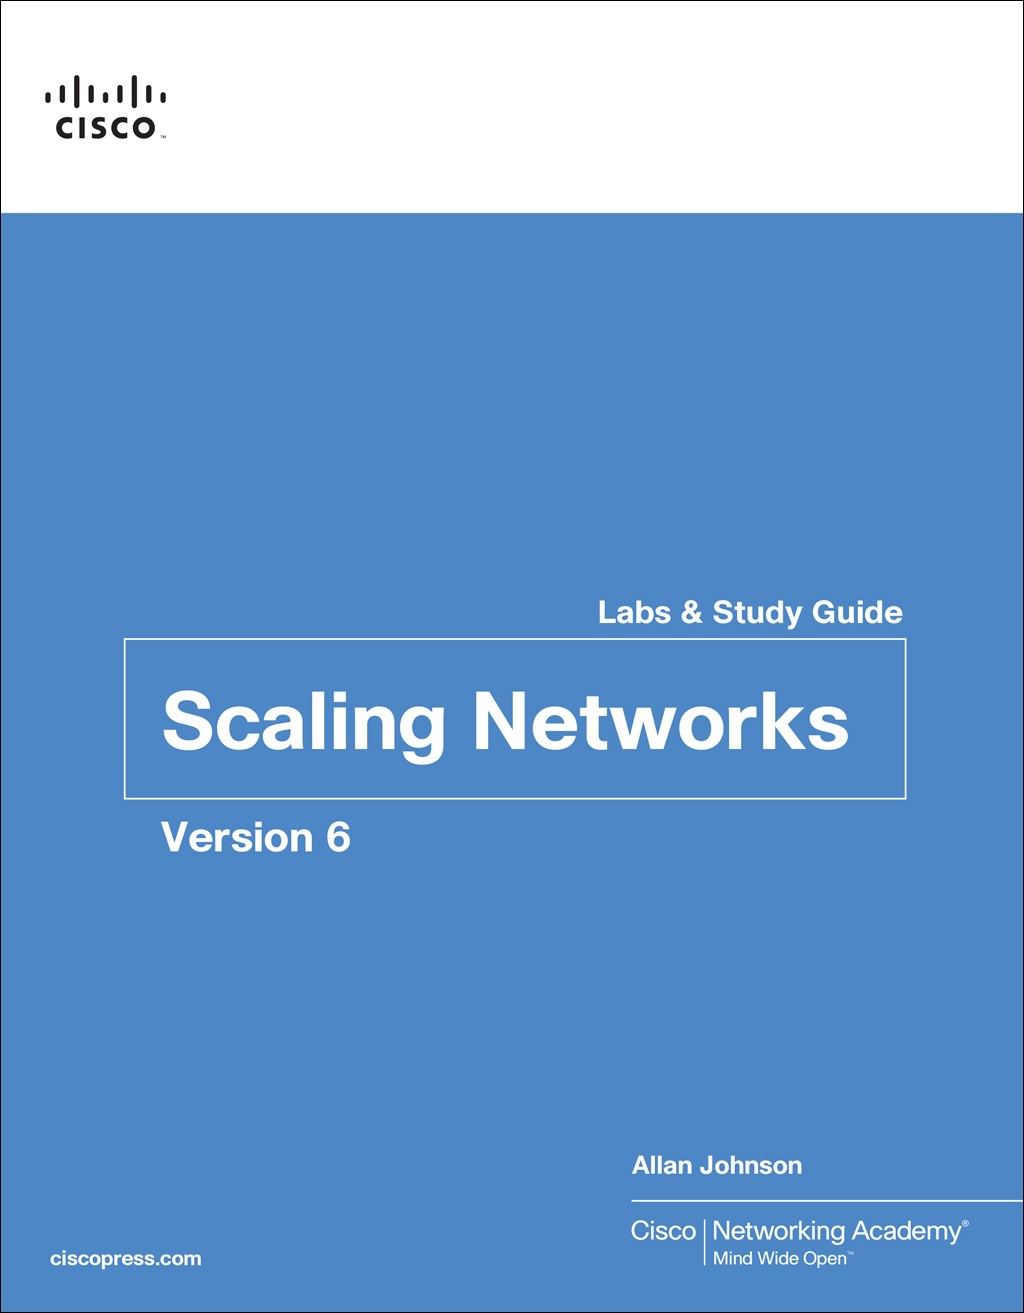 Scaling Networks v6 Labs & Study Guide | Cisco Press